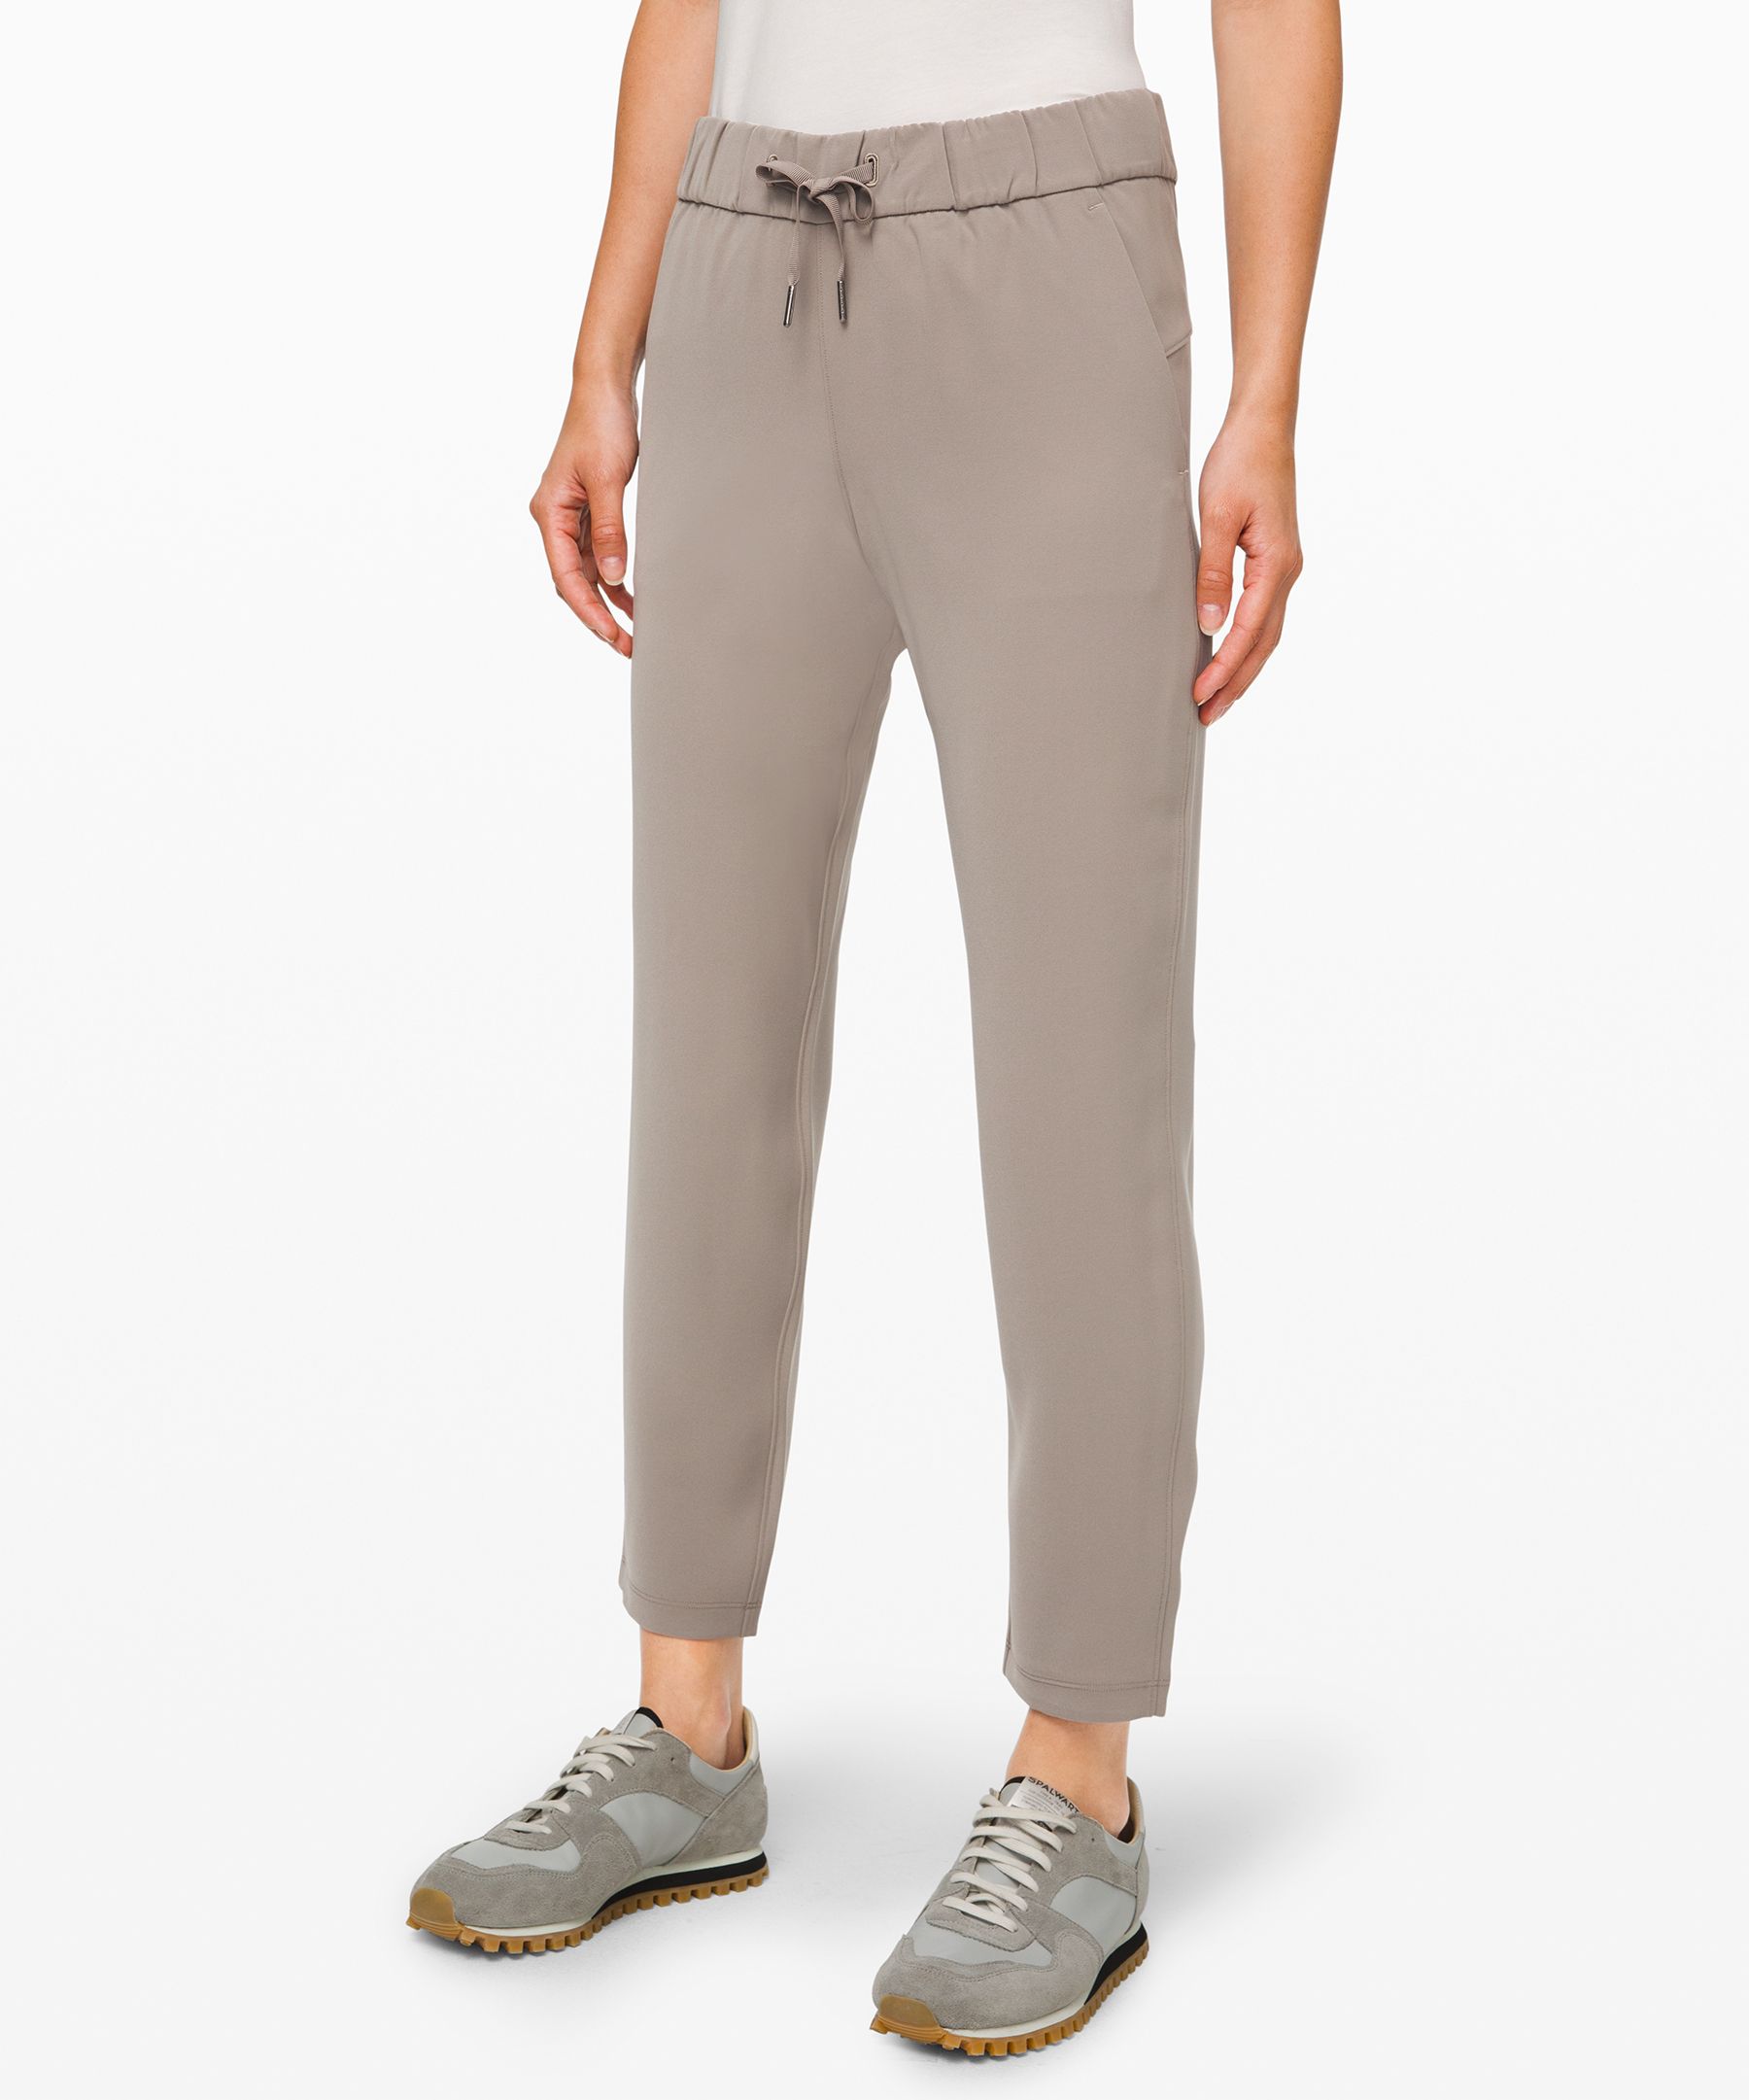 lululemon on the fly pant woven